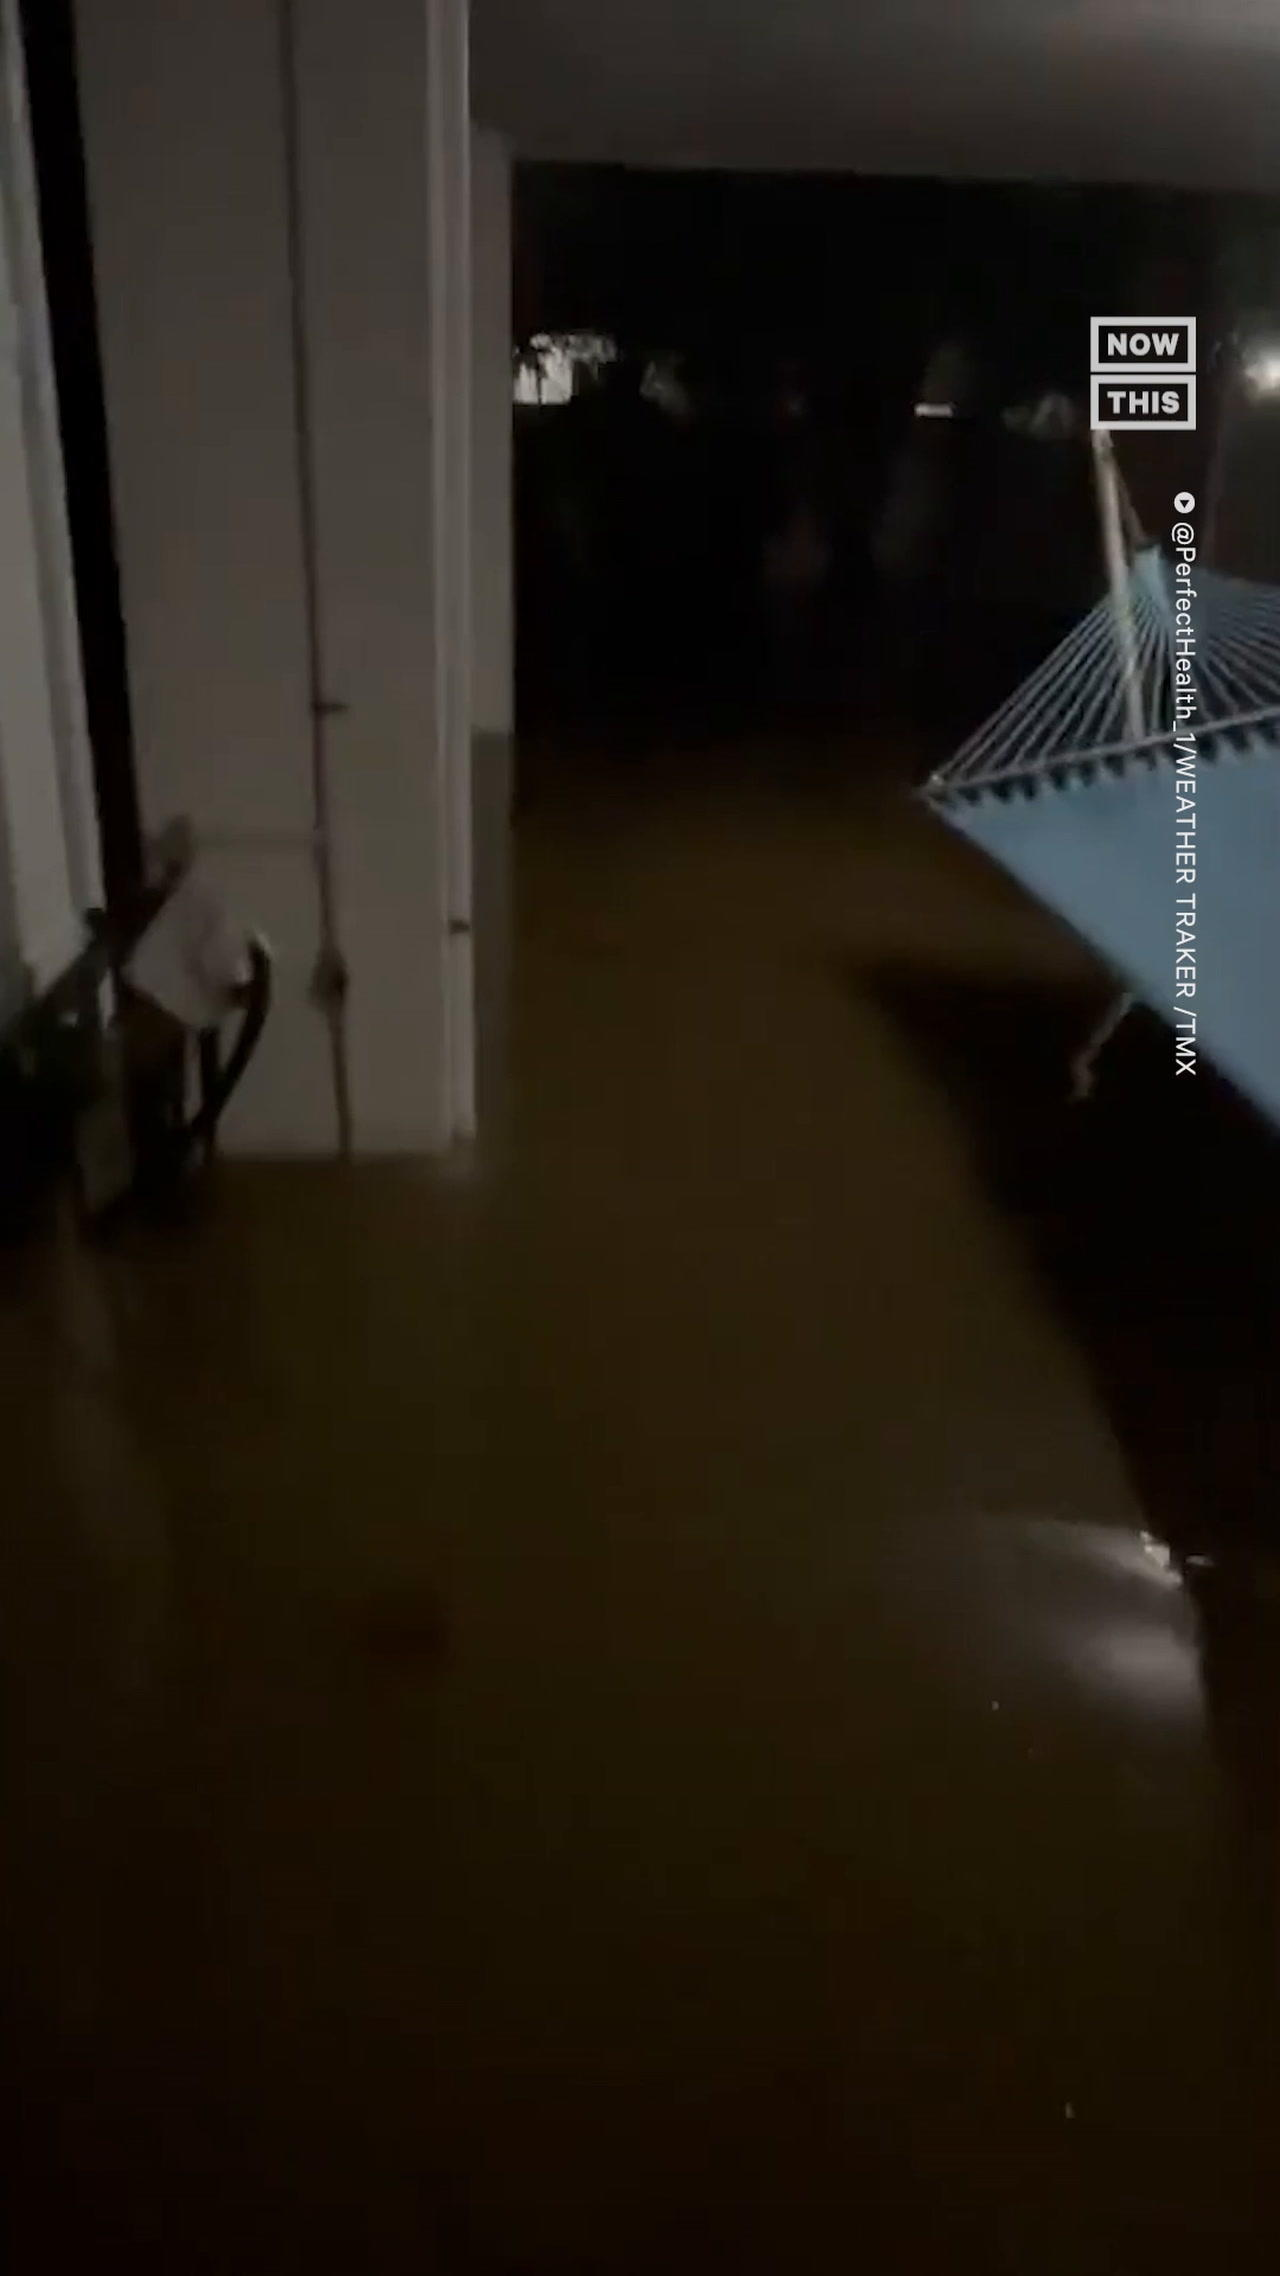 Key West House Completely Floods as Hurricane Ian Approaches